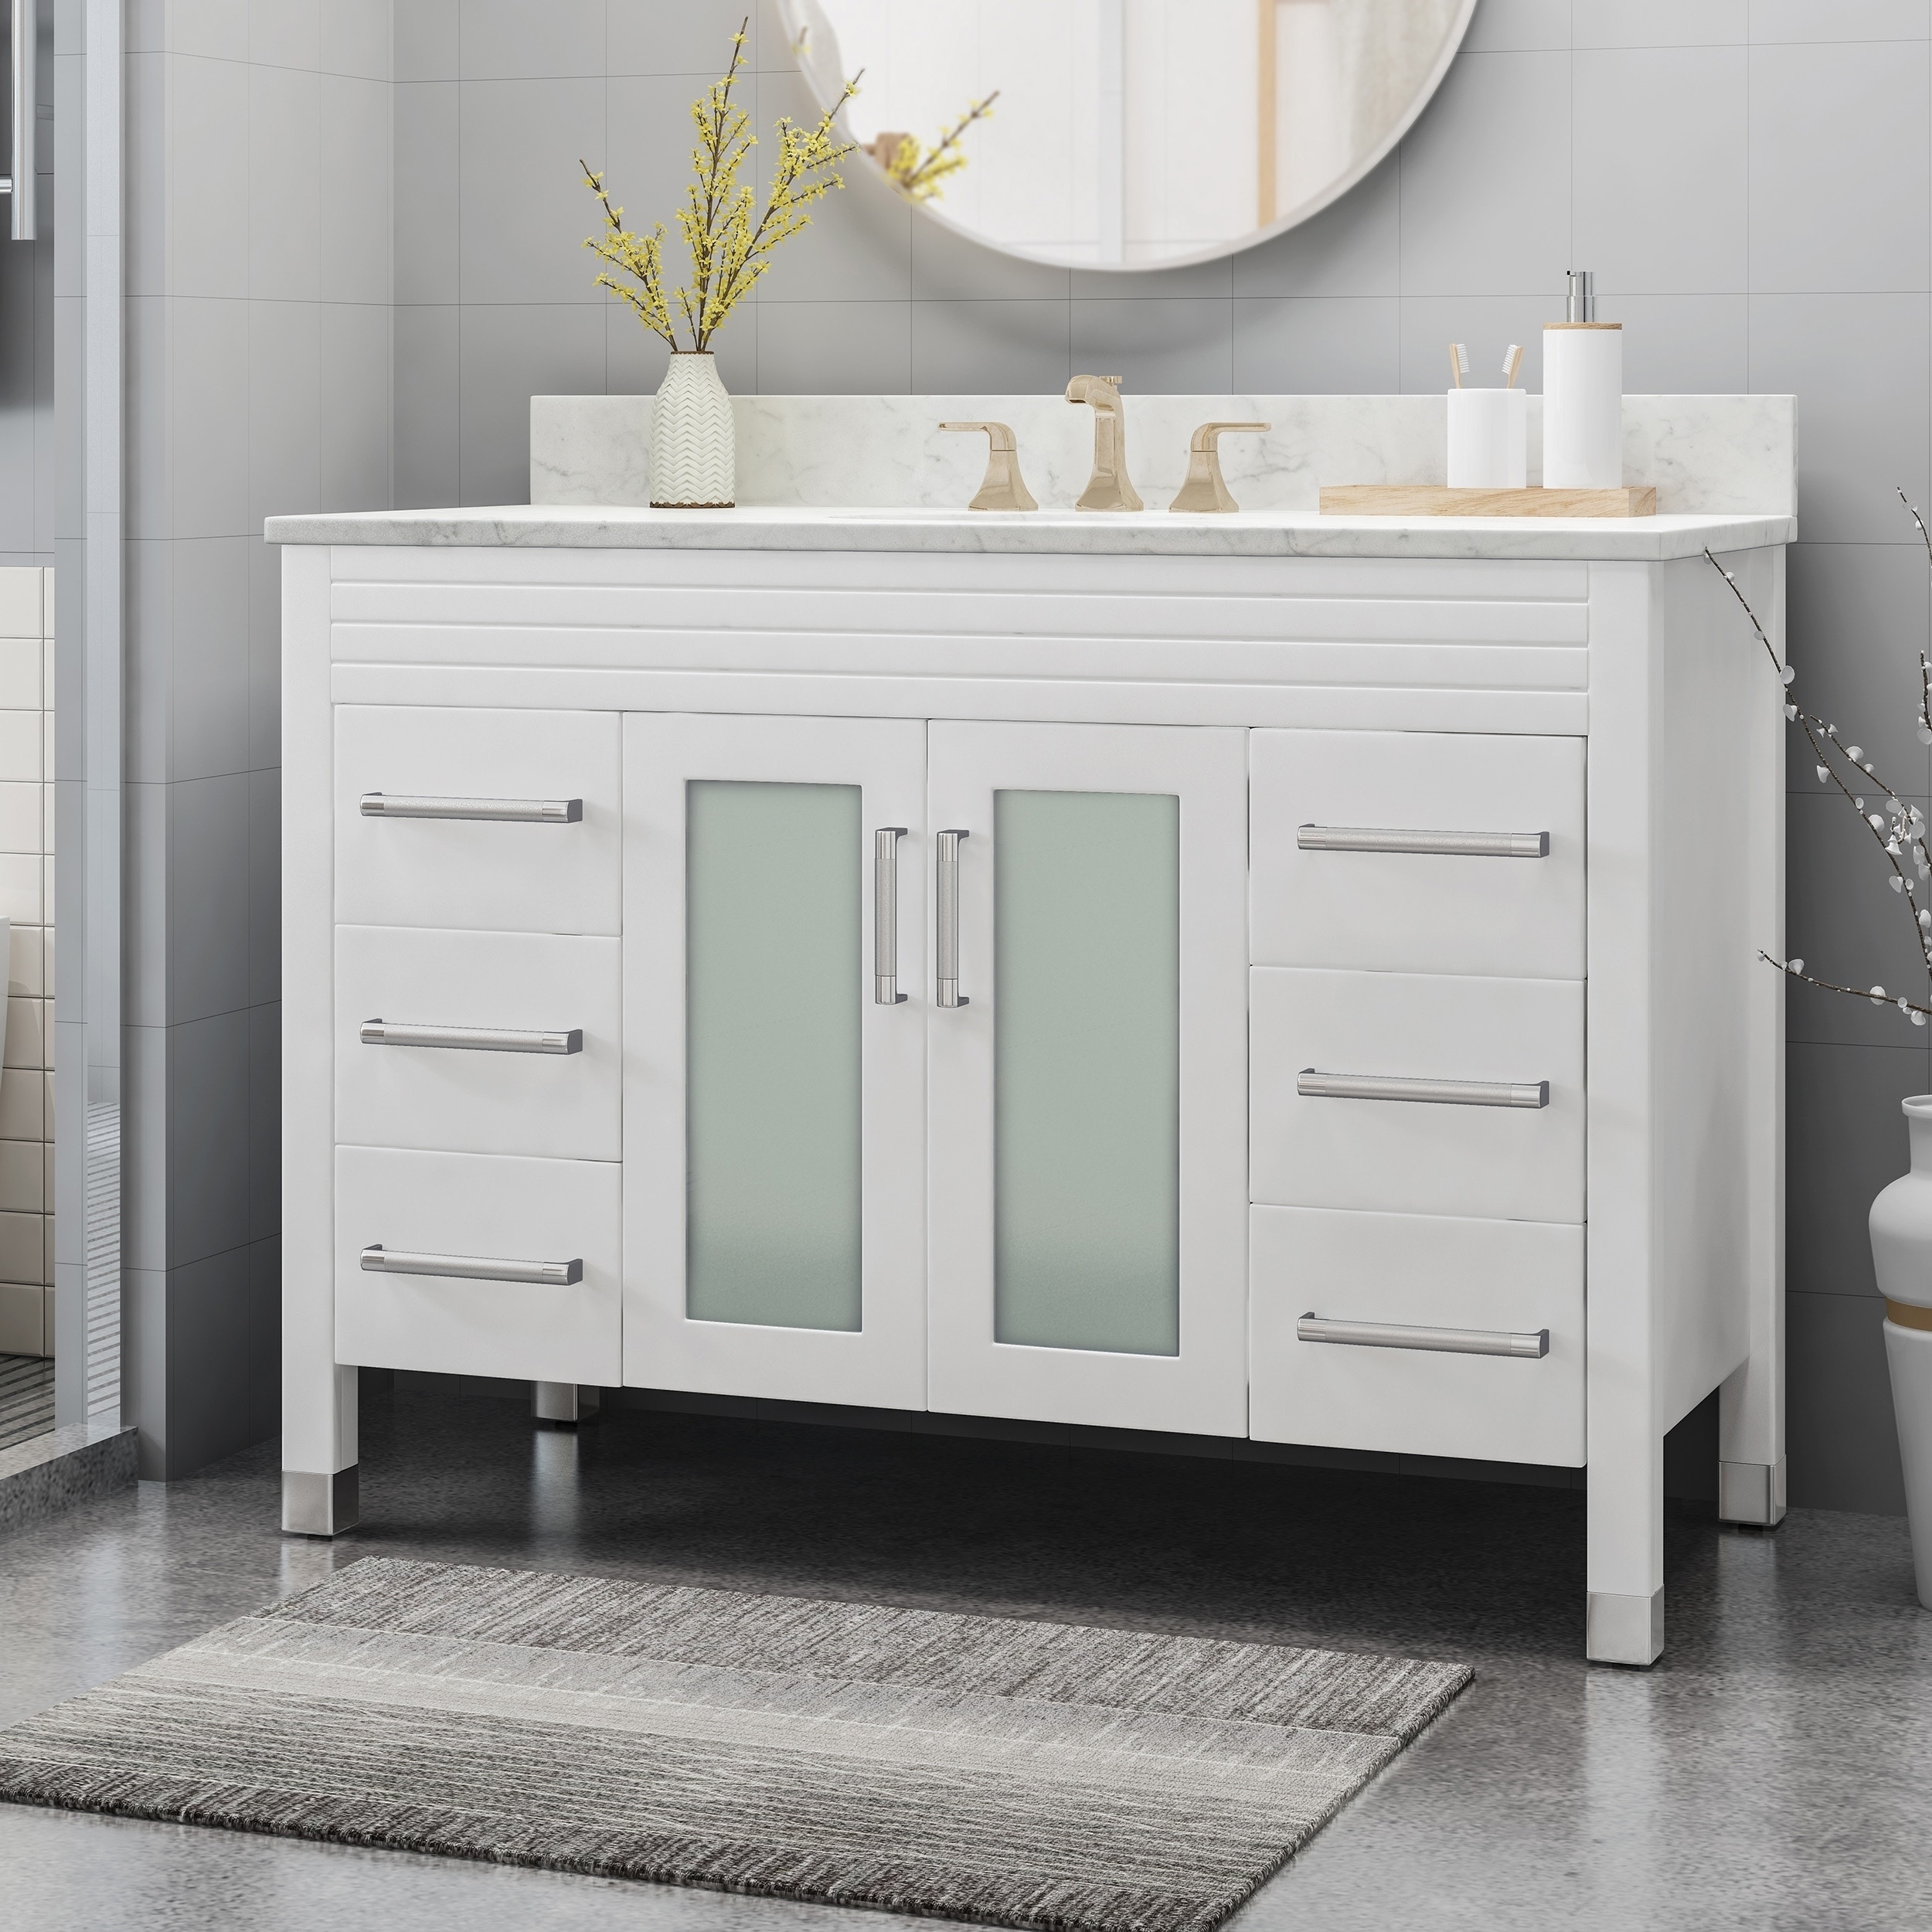 Holdame Contemporary 48 Wood Single Sink Bathroom Vanity With Carrera Marble Top By Christopher Knight Home On Sale Overstock 25716176